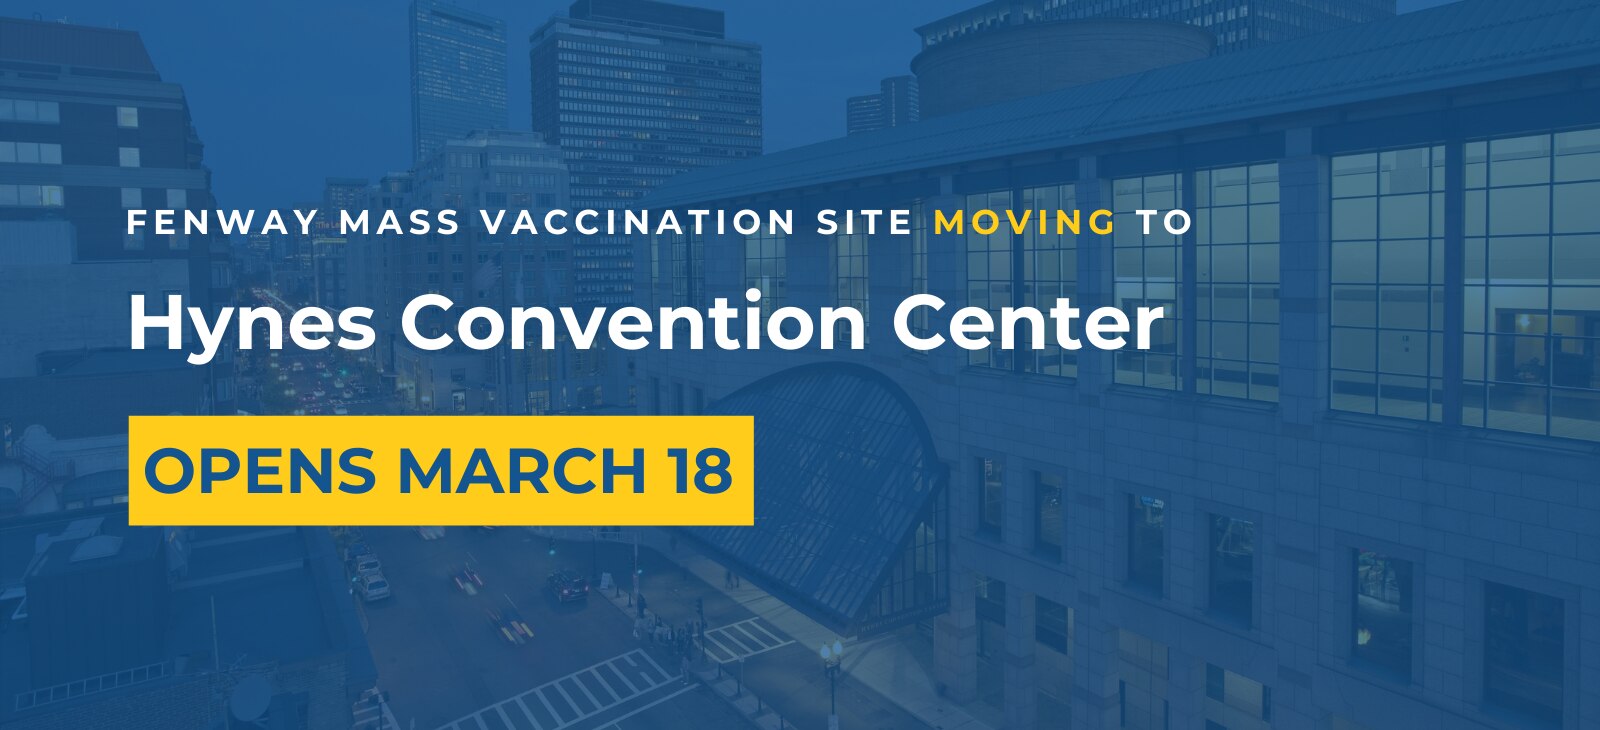 Baker-Polito Administration Announces Transition of Fenway Park Mass Vaccination Site to Hynes Convention Center